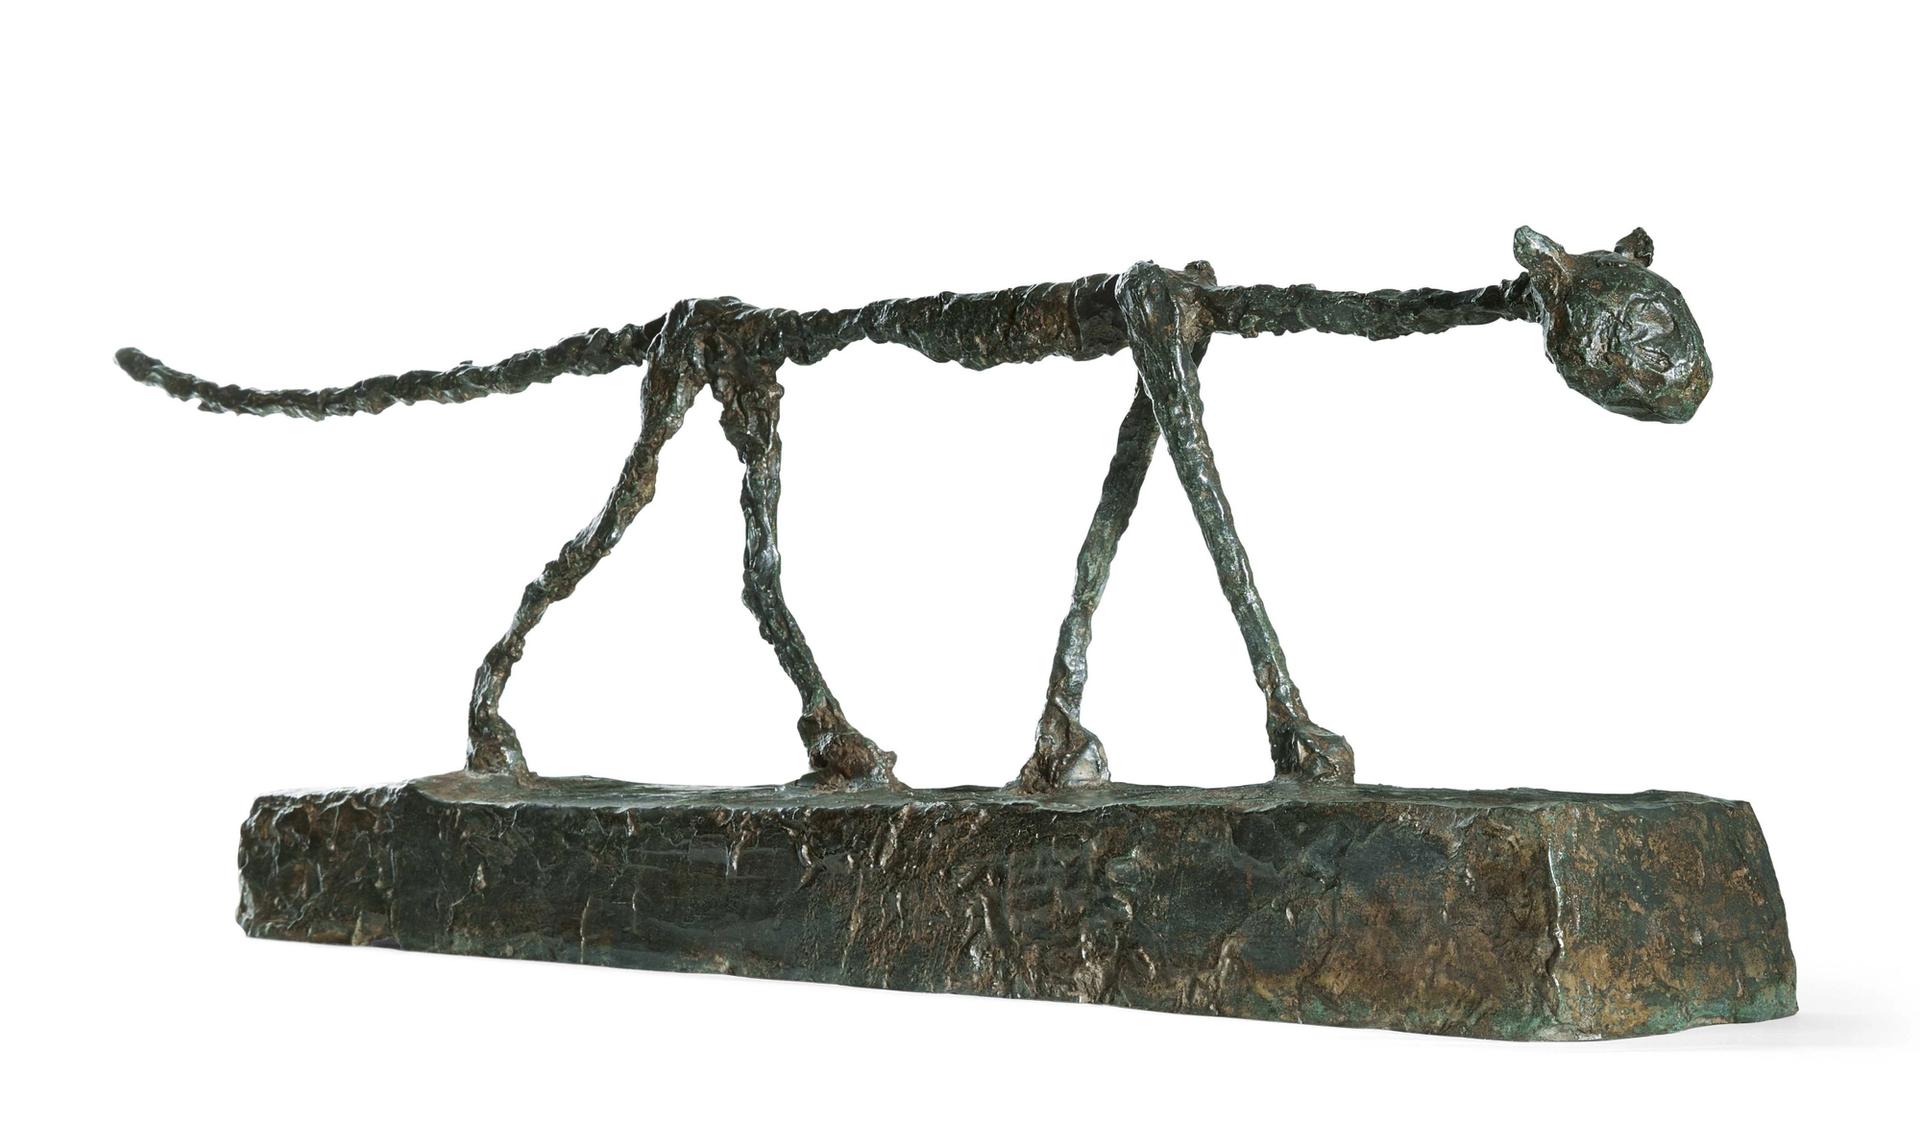 Alberto Giacometti, Le Chat, sold at Sotheby's Sotheby's